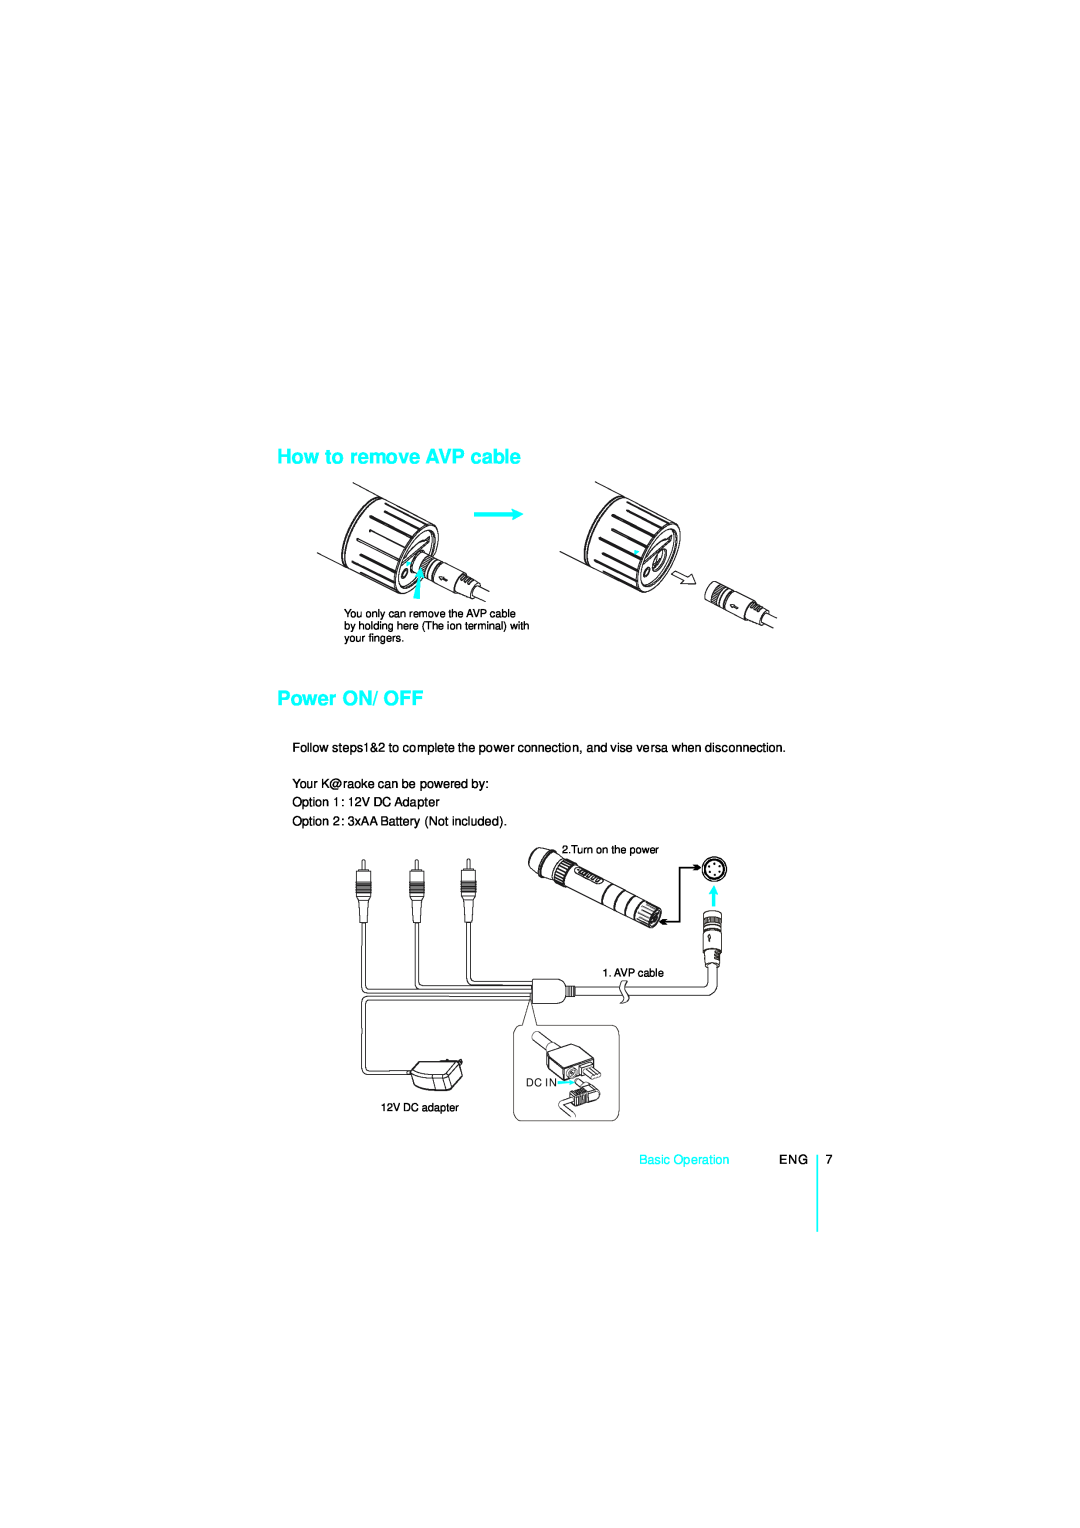 NextBase Microphone manual How to remove AVP cable, Power ON/ OFF, Your K@raoke can be powered by Option 1 12V DC Adapter 